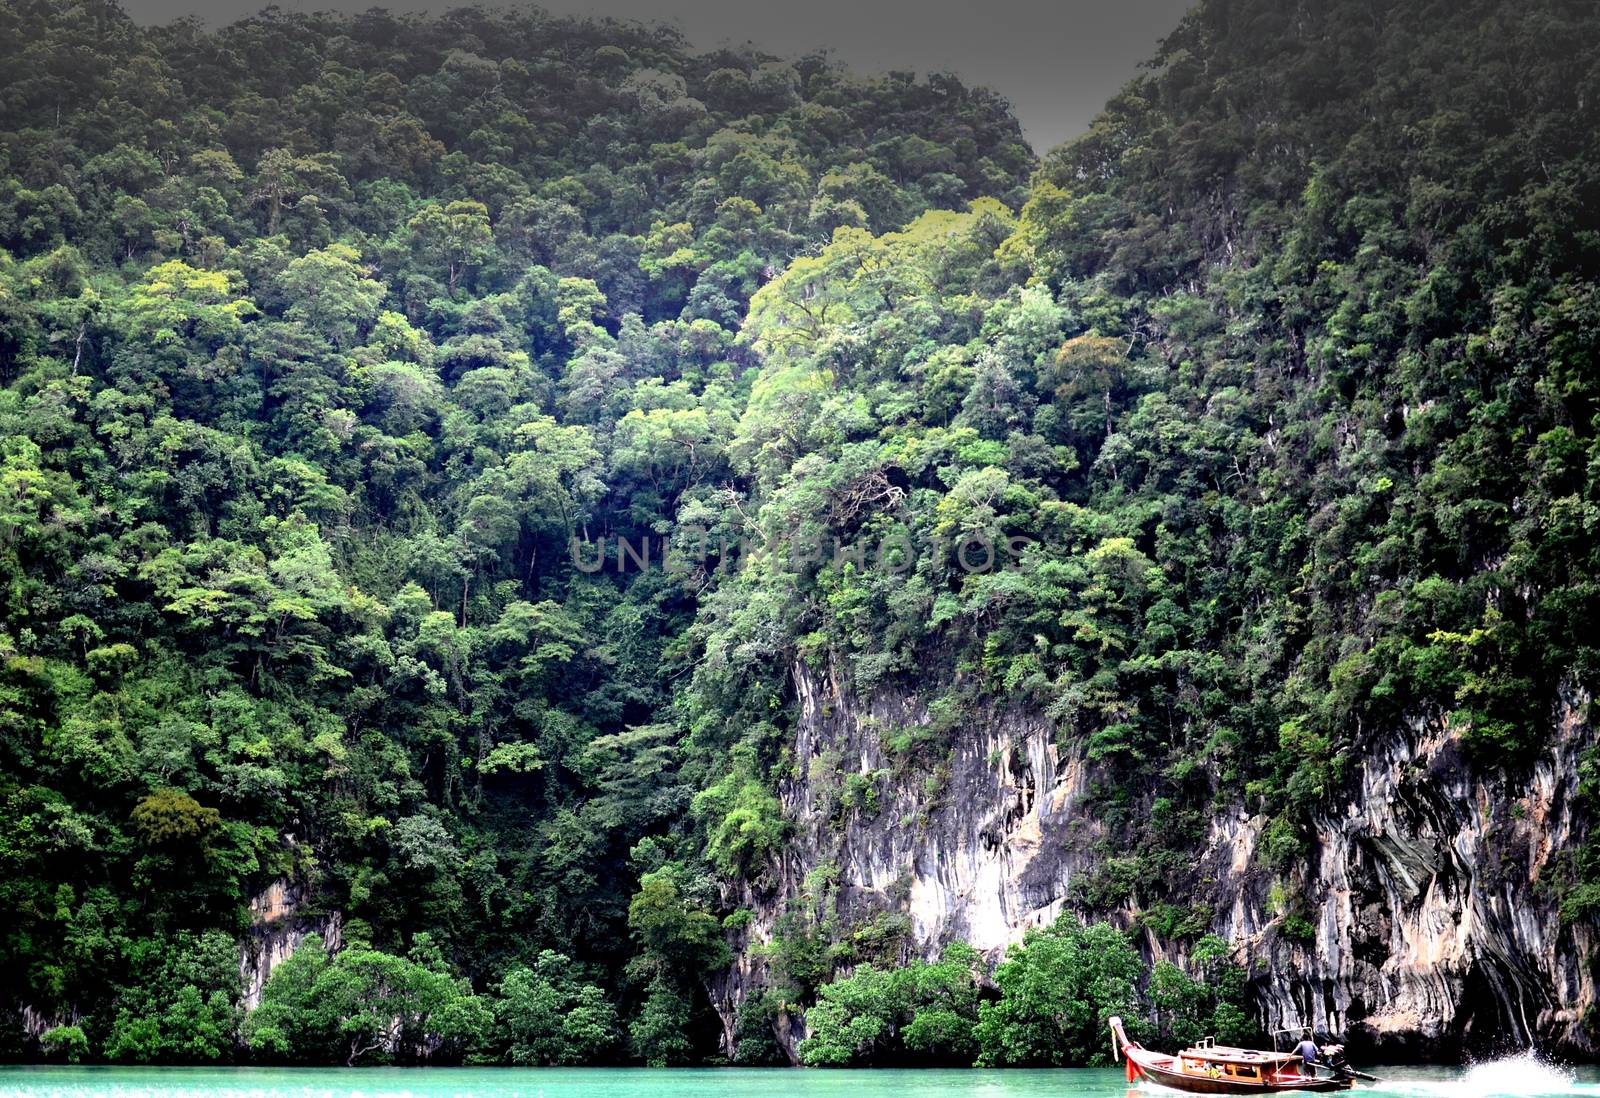 The Big duo mountain has above the boat on the sea krabi island thailand.